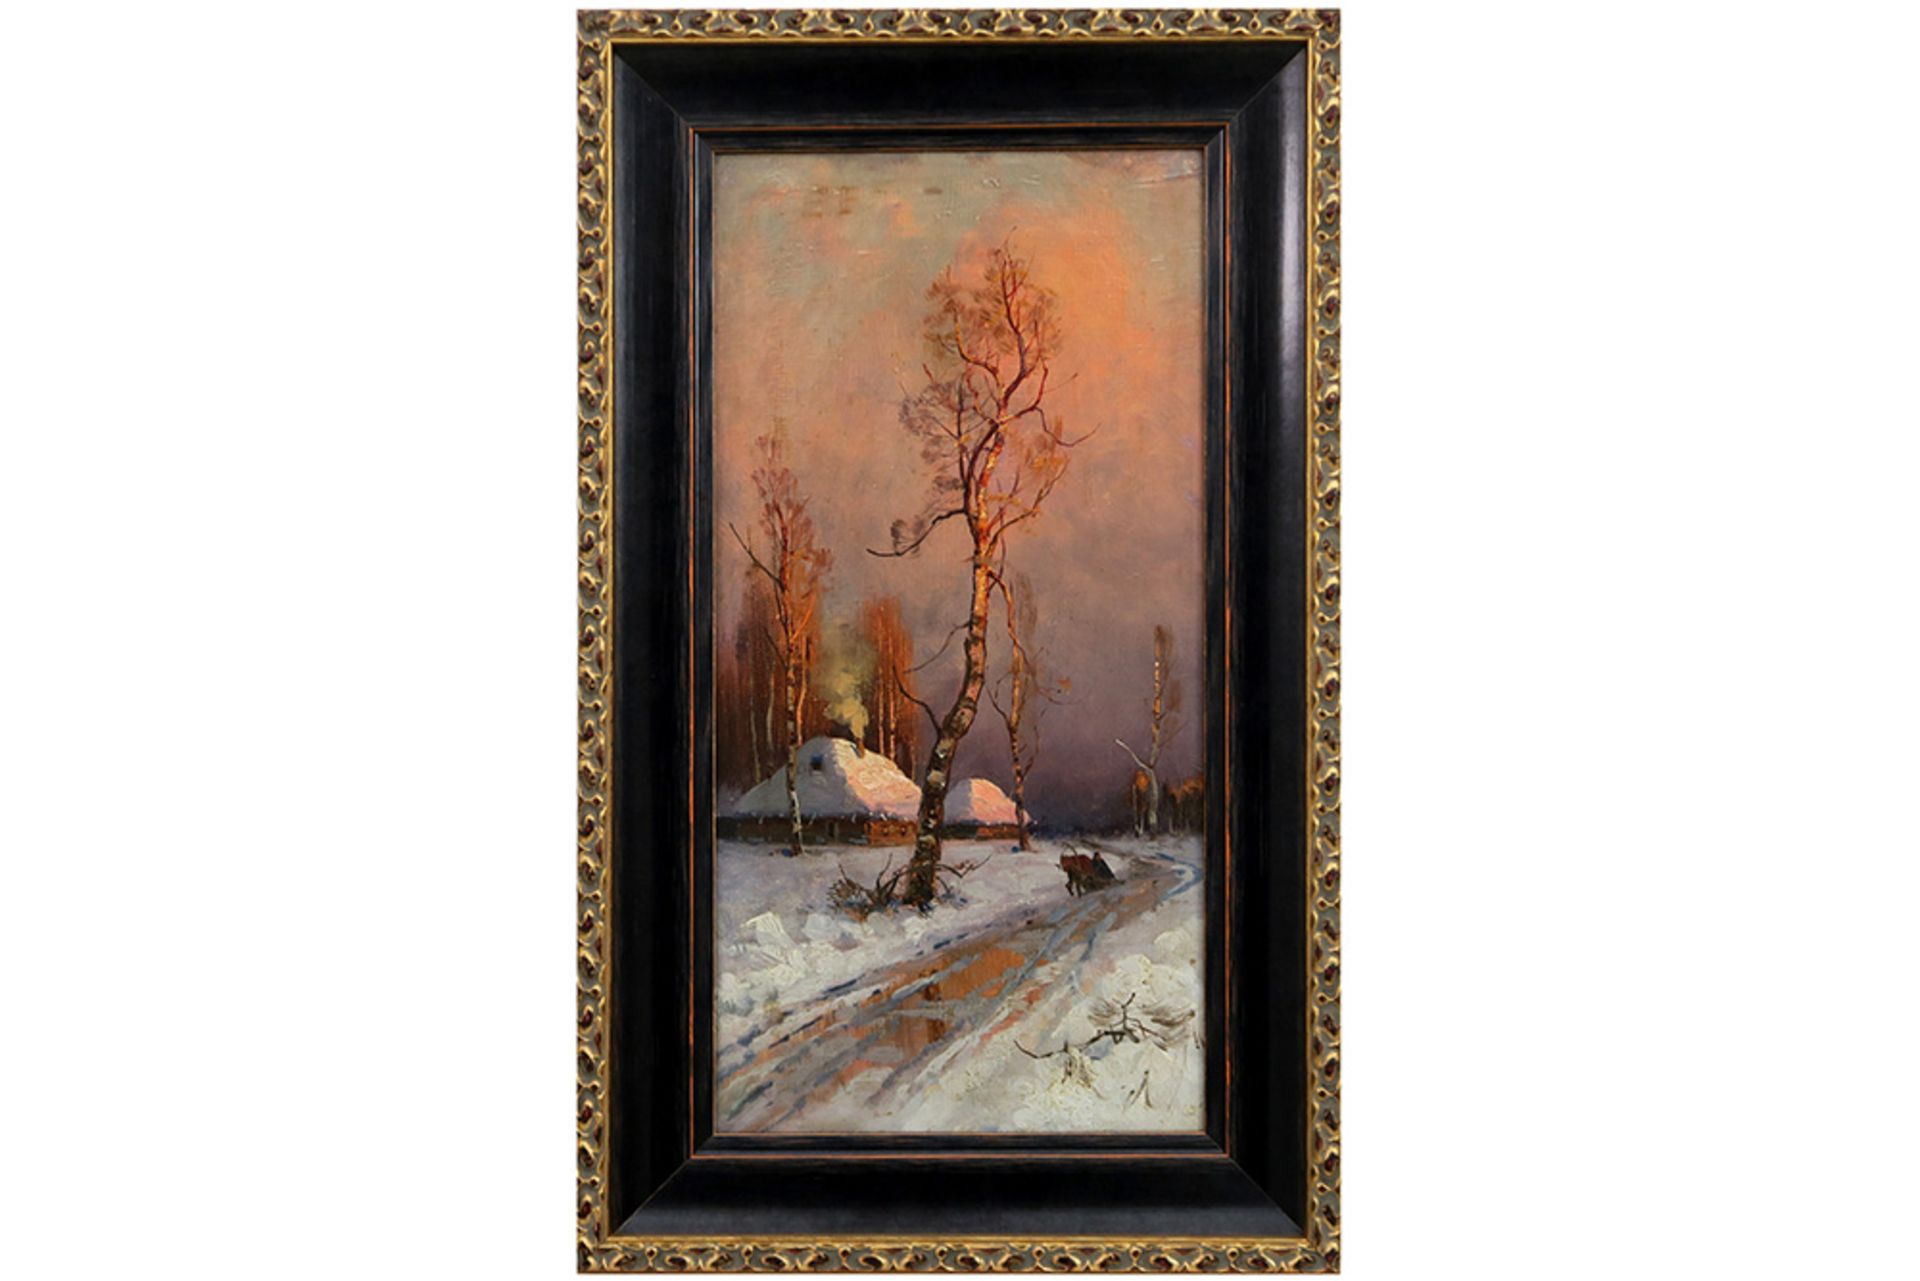 early 20th Cent. Russian "Landscape" oil on canvas - with an inscription on the back "H. Krebepz" || - Image 2 of 3